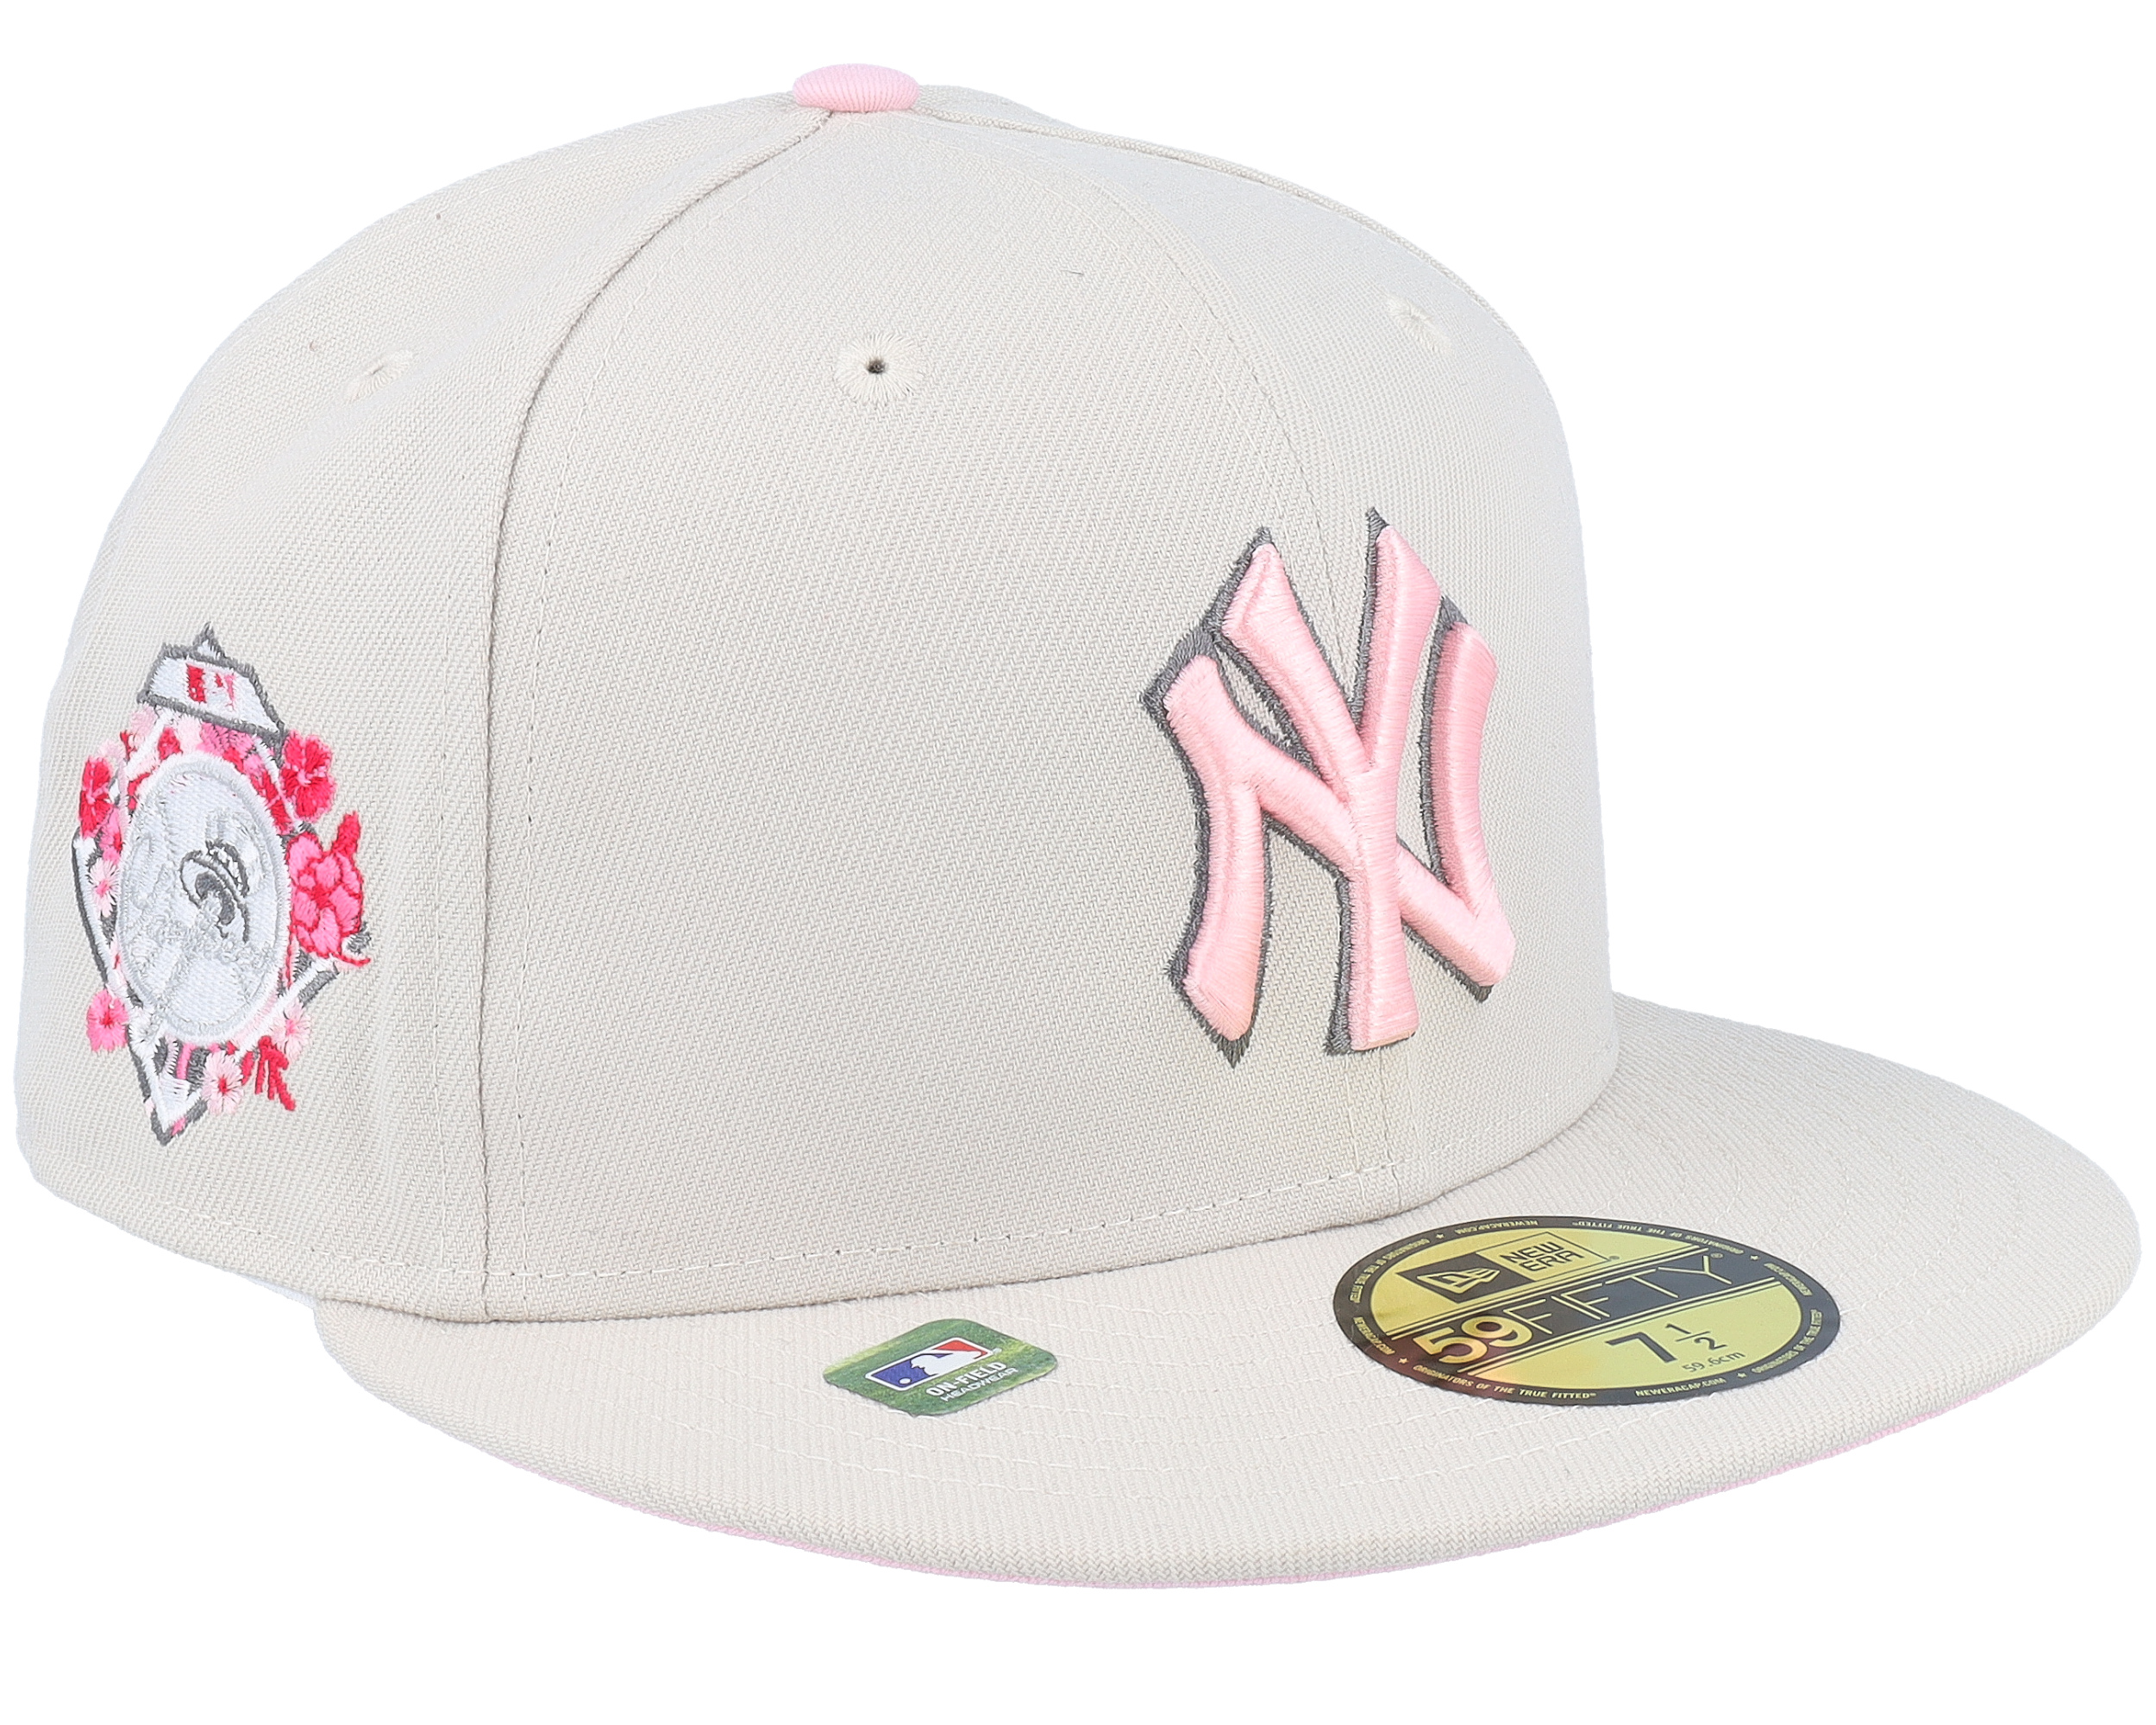 New York Yankees 59FIFTY Mothers Day 23 Beige/Pink Fitted - New Era cap